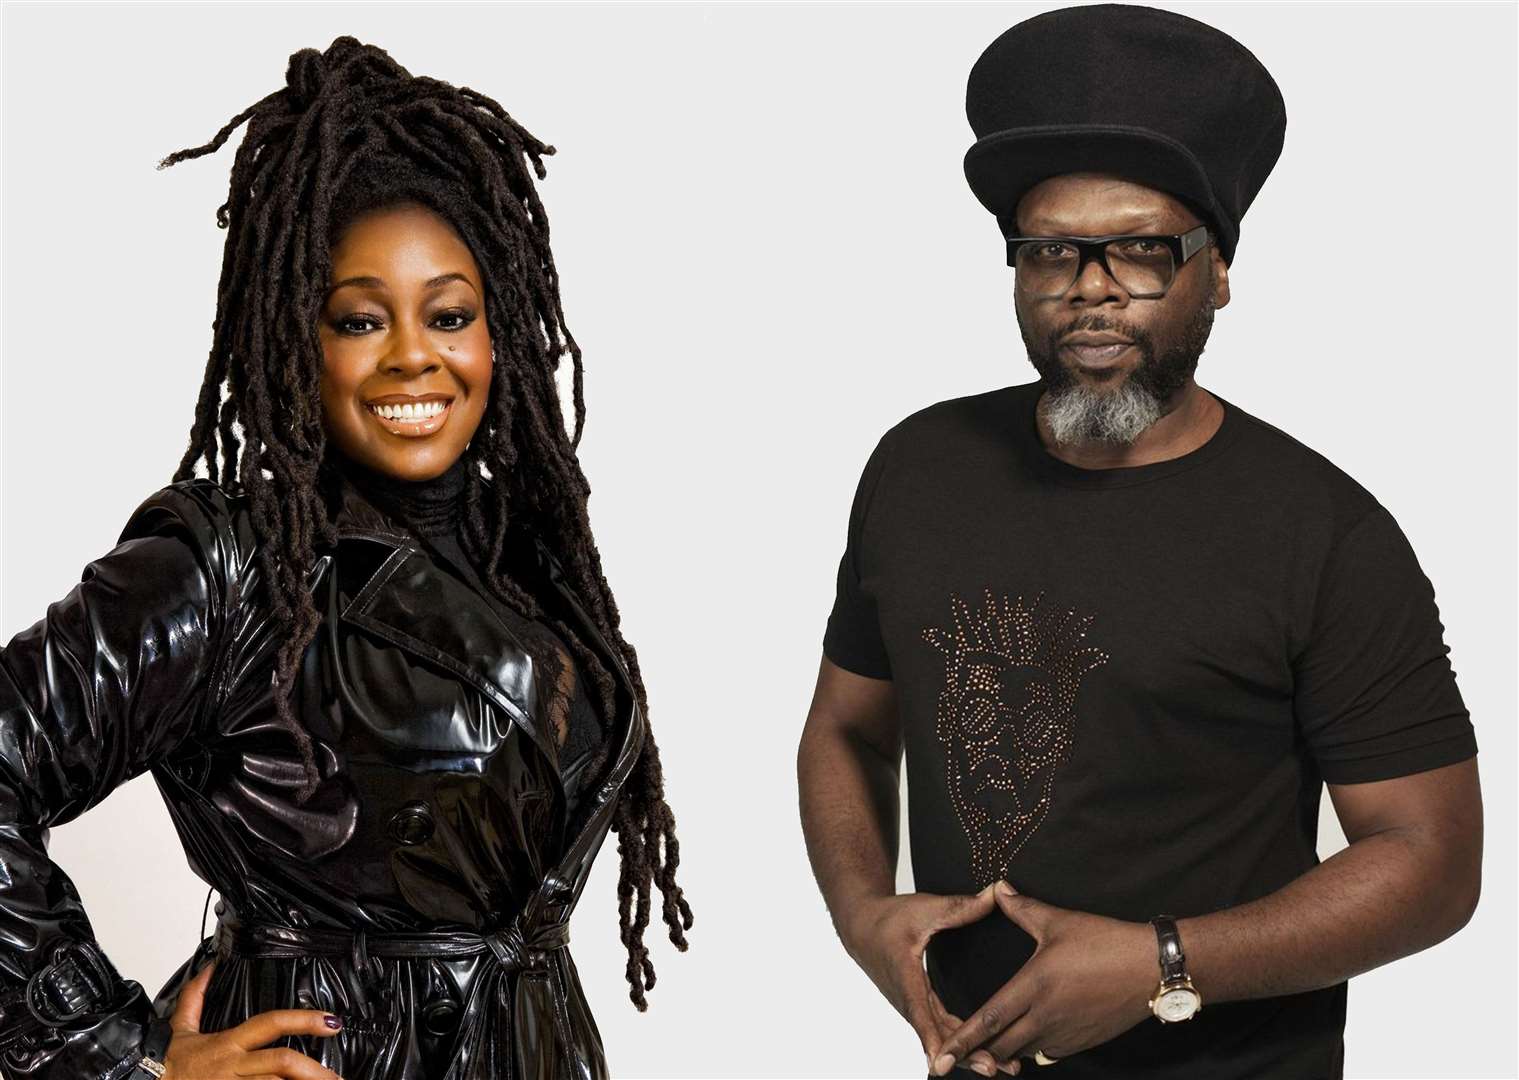 Tickets for Soul II Soul have sold out